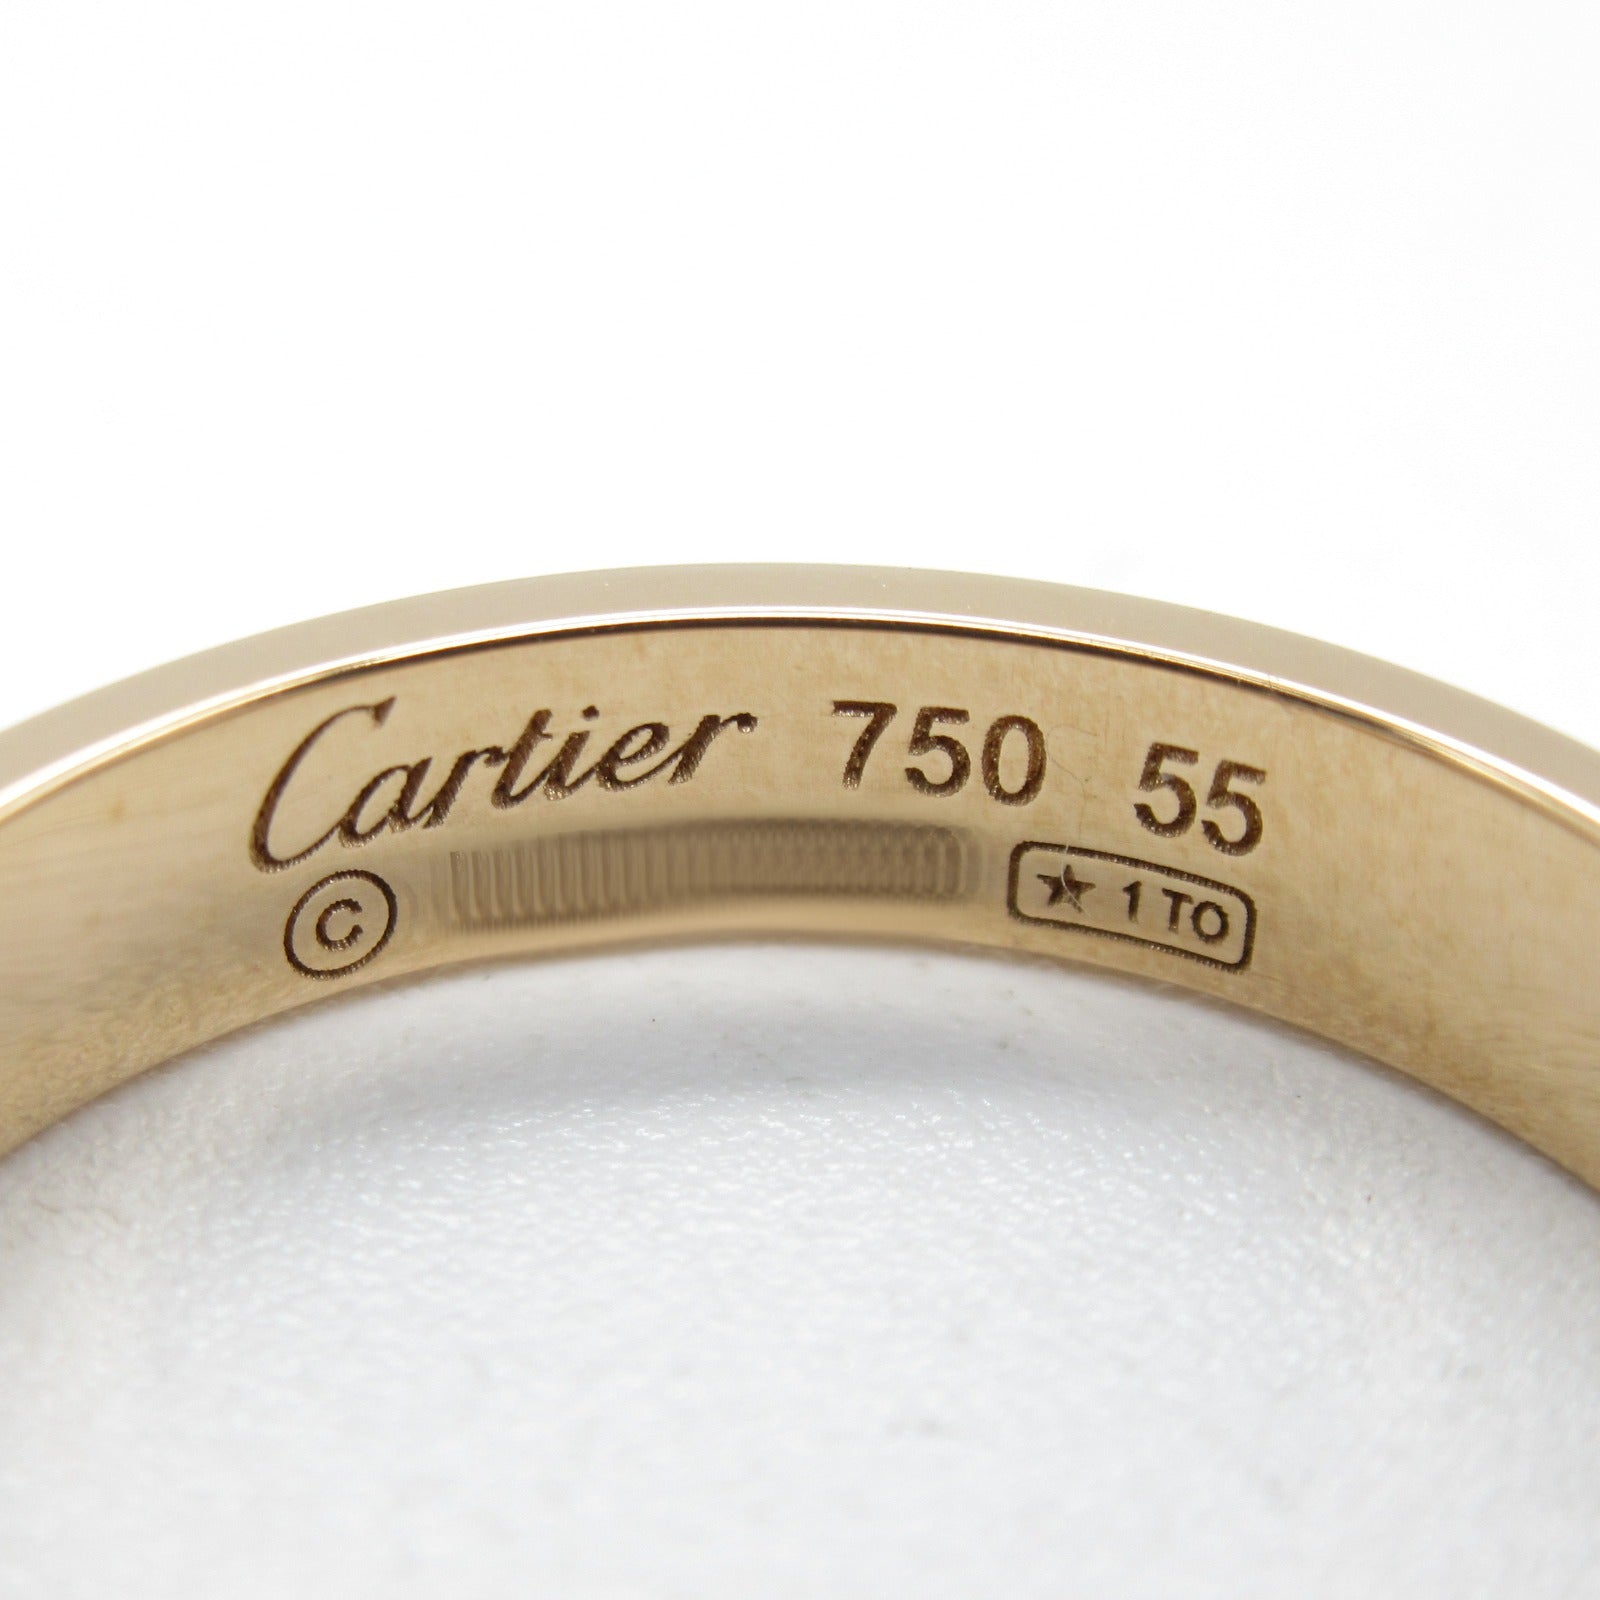 Cartier Cartier Mini-Love Ring Ring Jewelry K18PG (Pink G)  Gold  B4085200